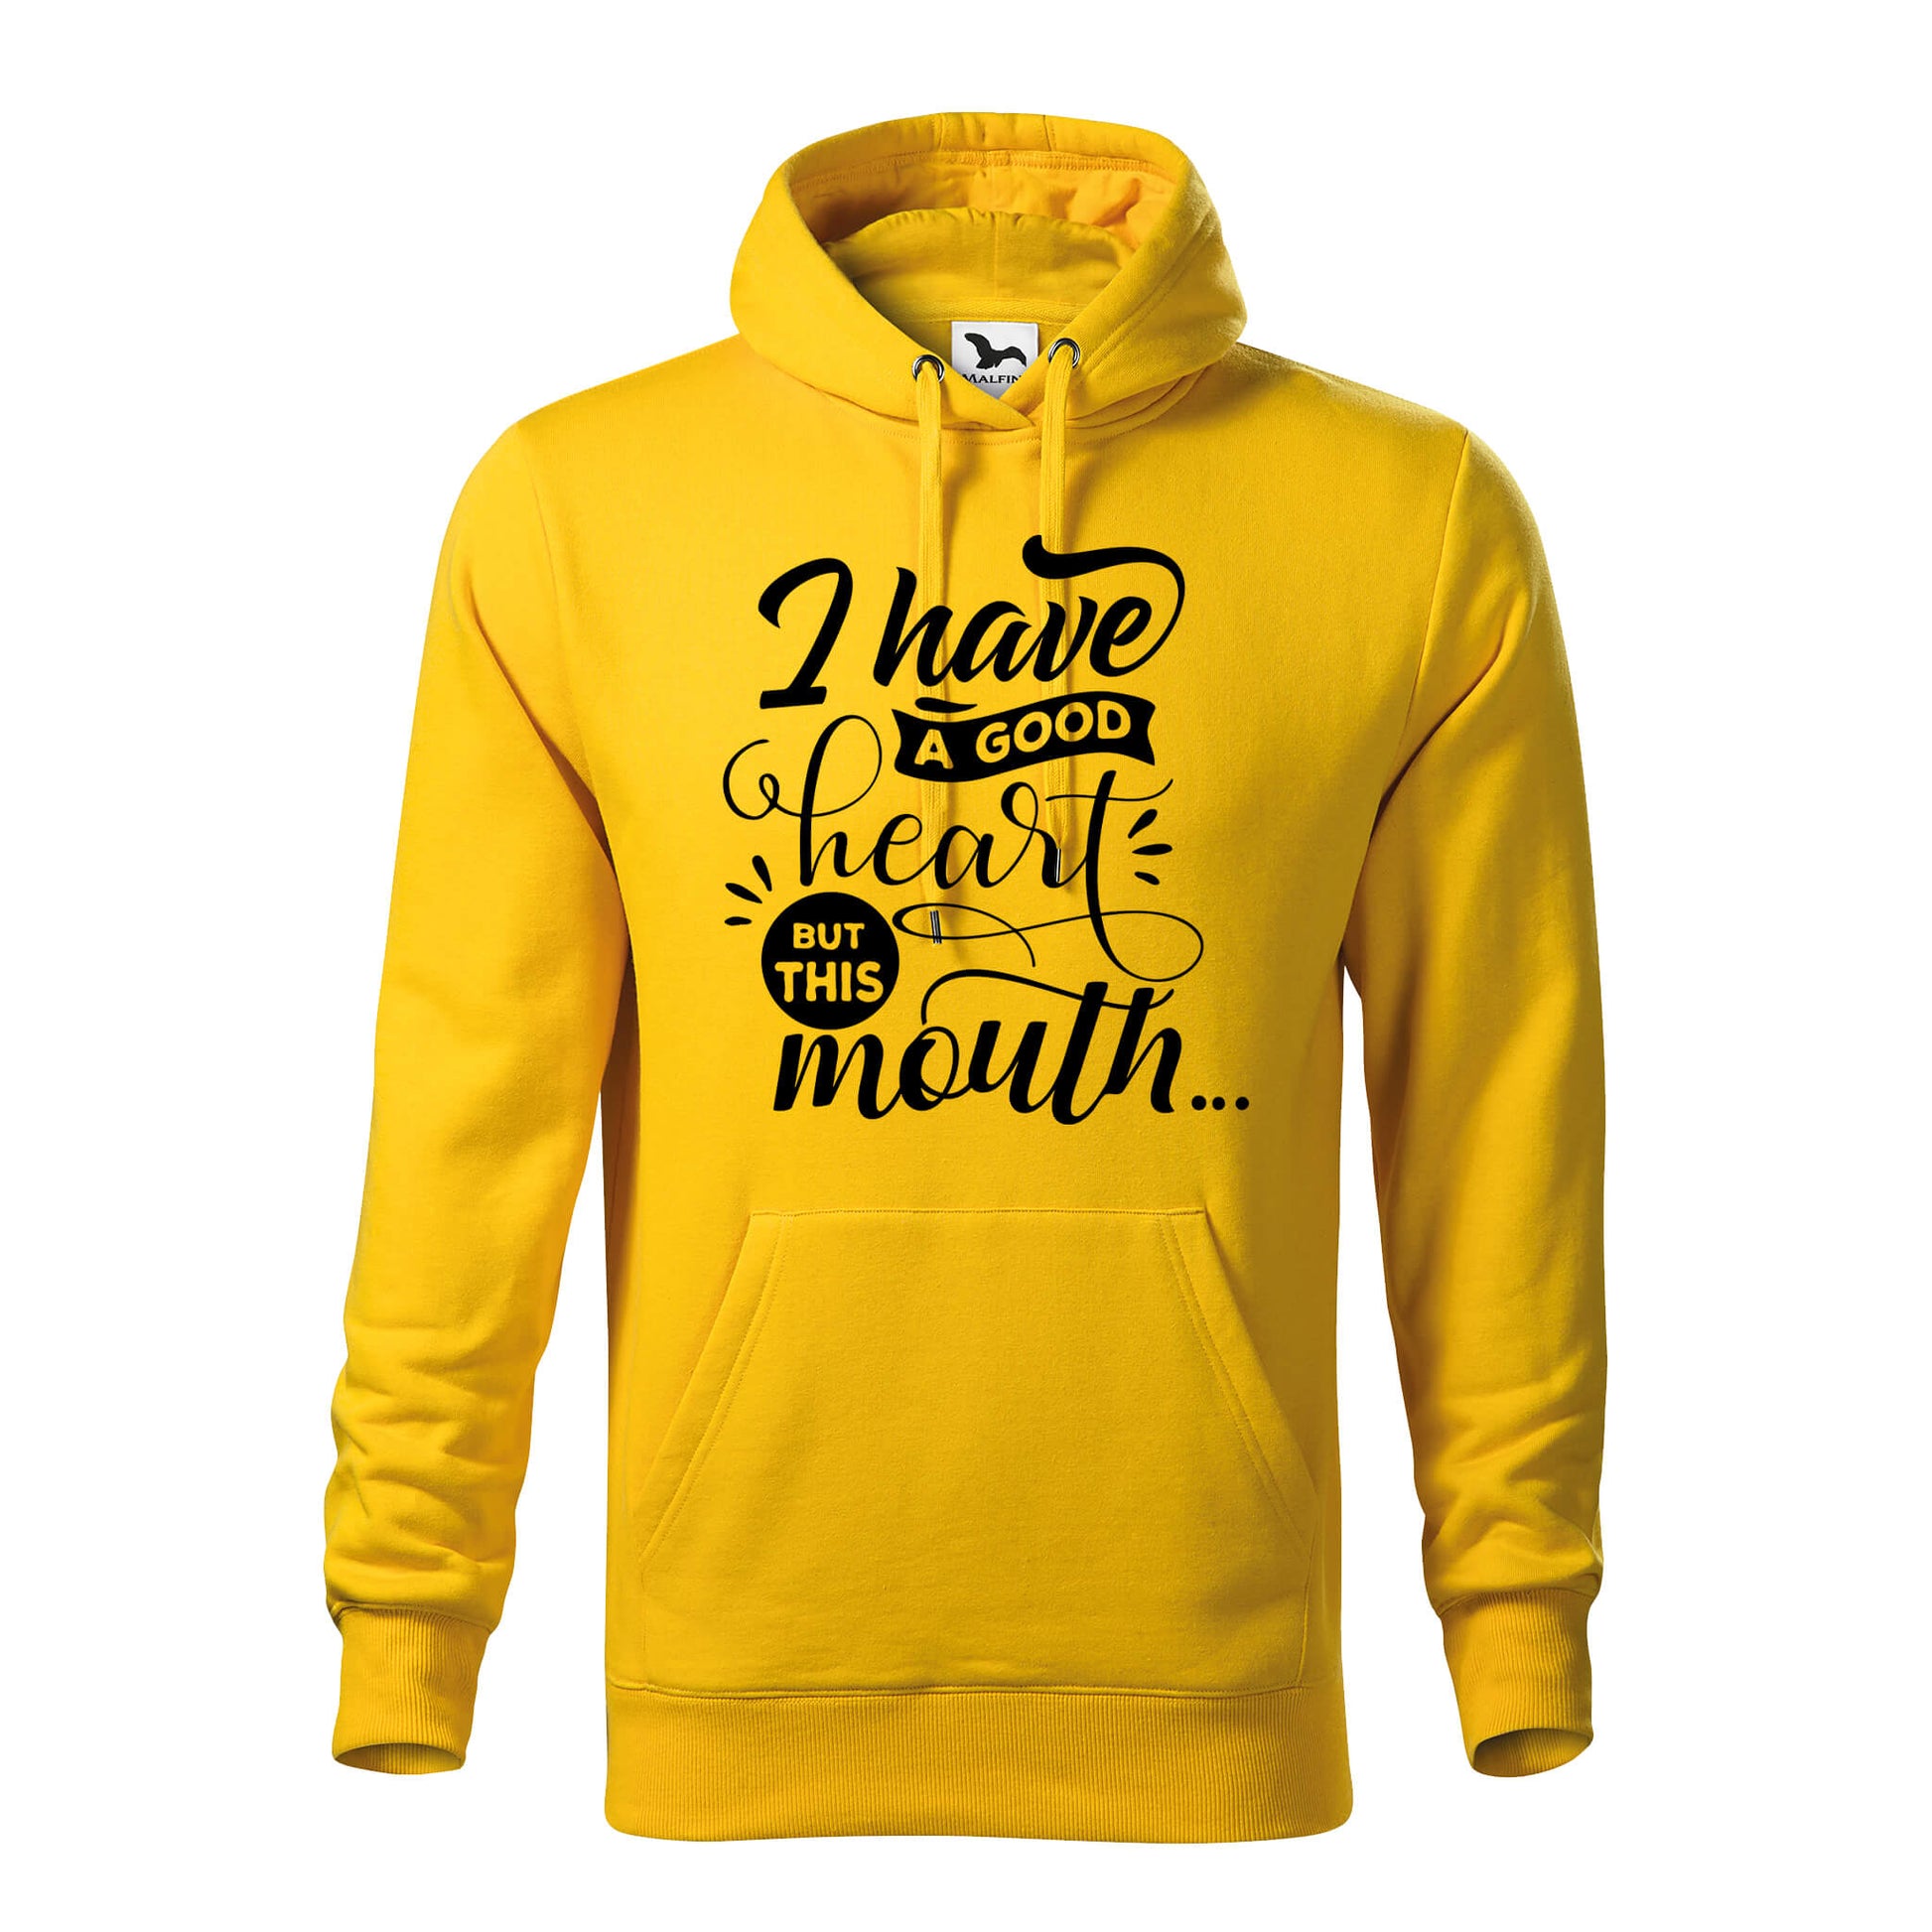 I have a good heart but this mouth hoodie - rvdesignprint